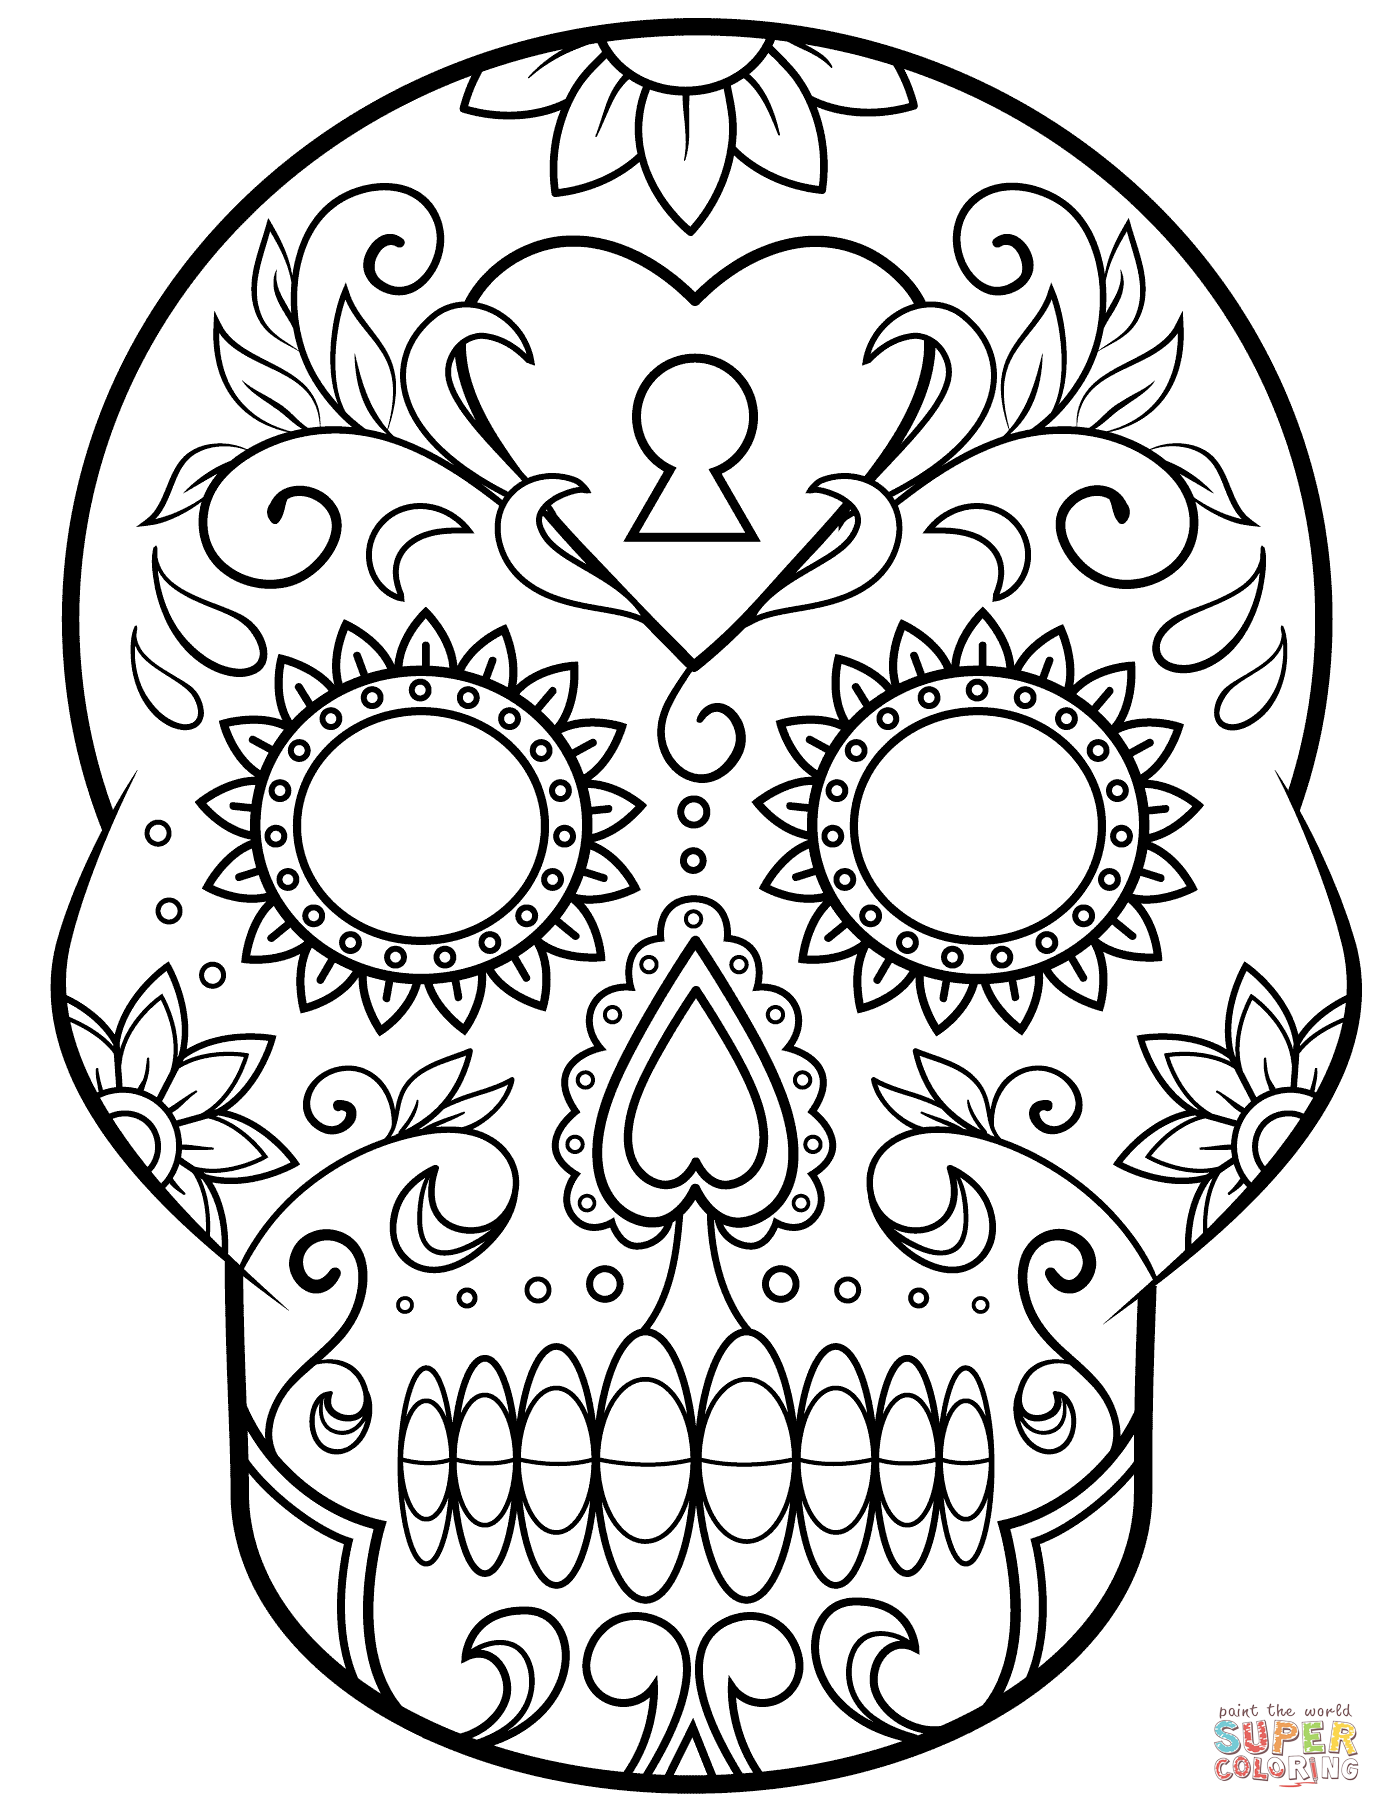 Day of the dead sugar skull coloring page free printable coloring pages